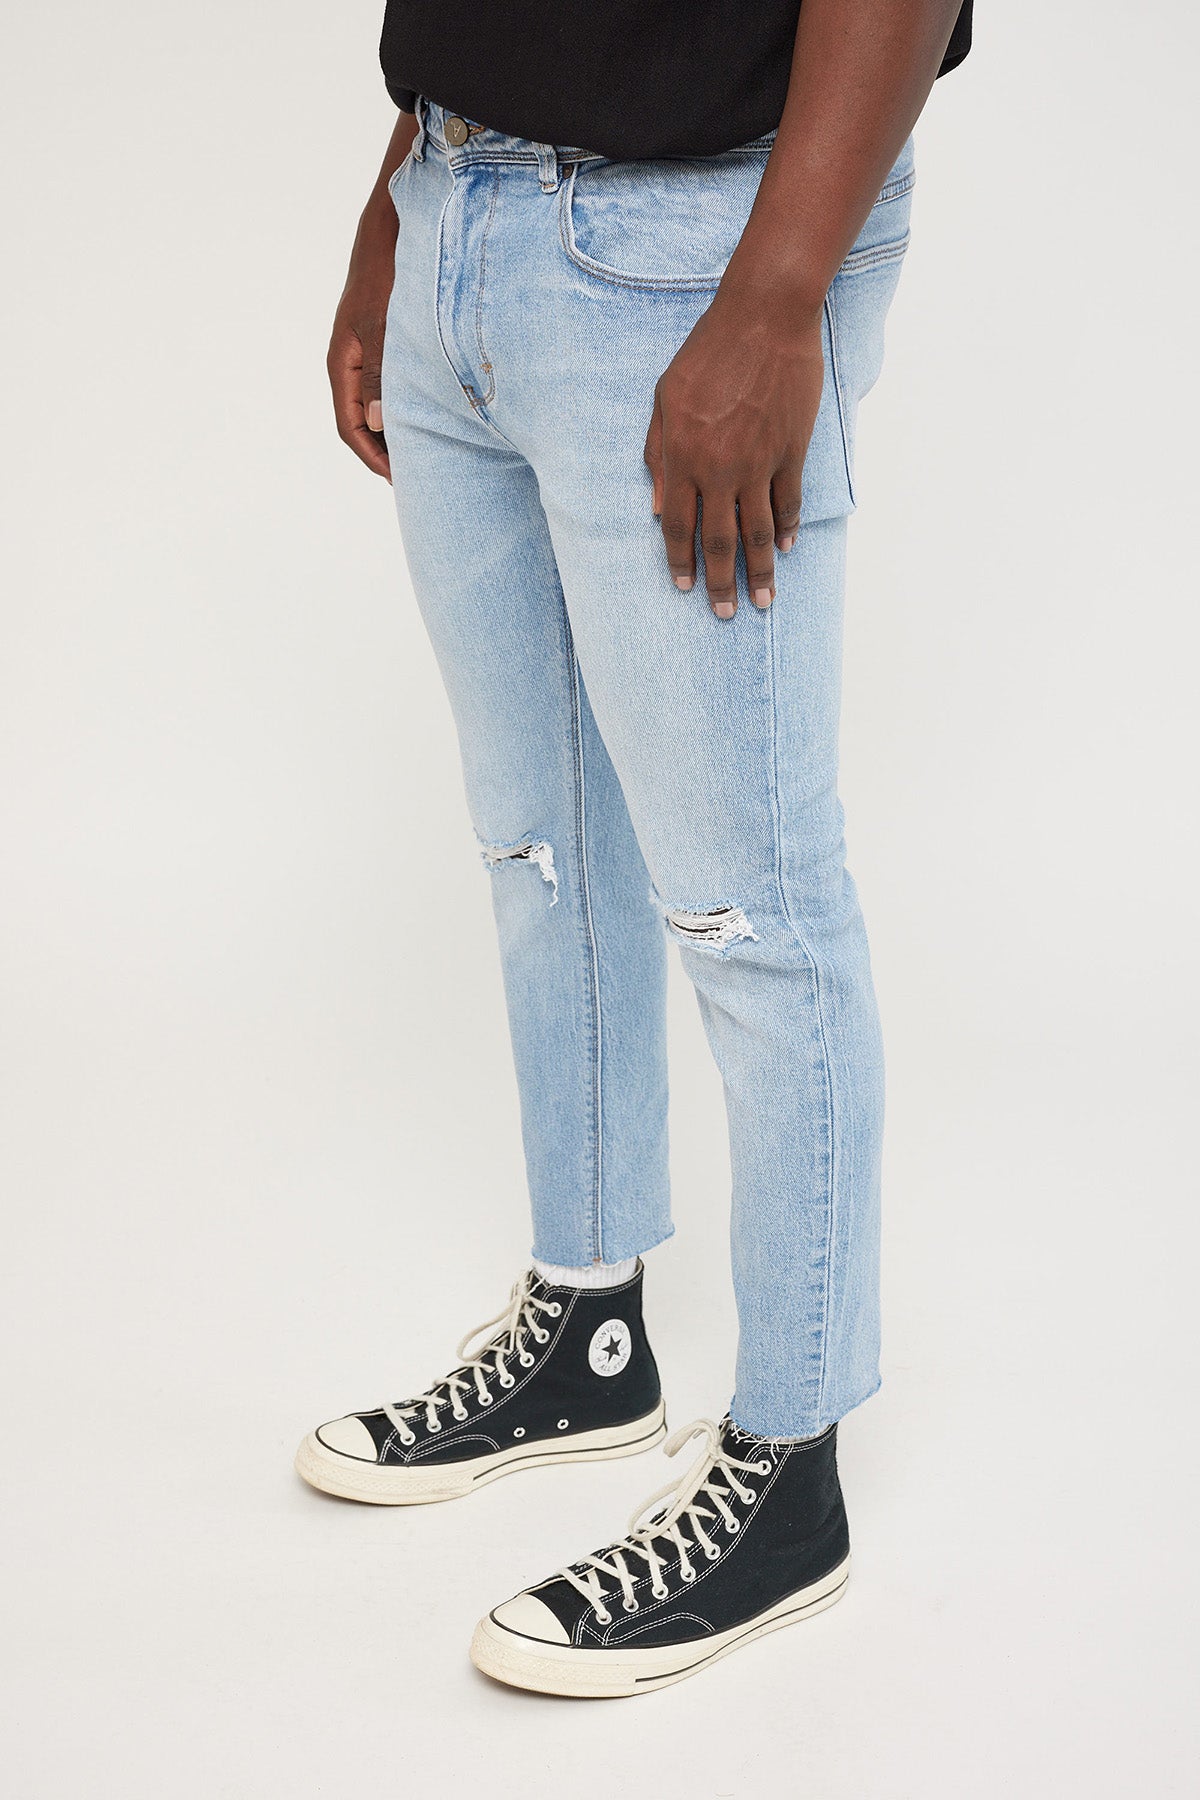 Abrand A Dropped Skinny Jean Ice Blue Rip OG – Universal Store